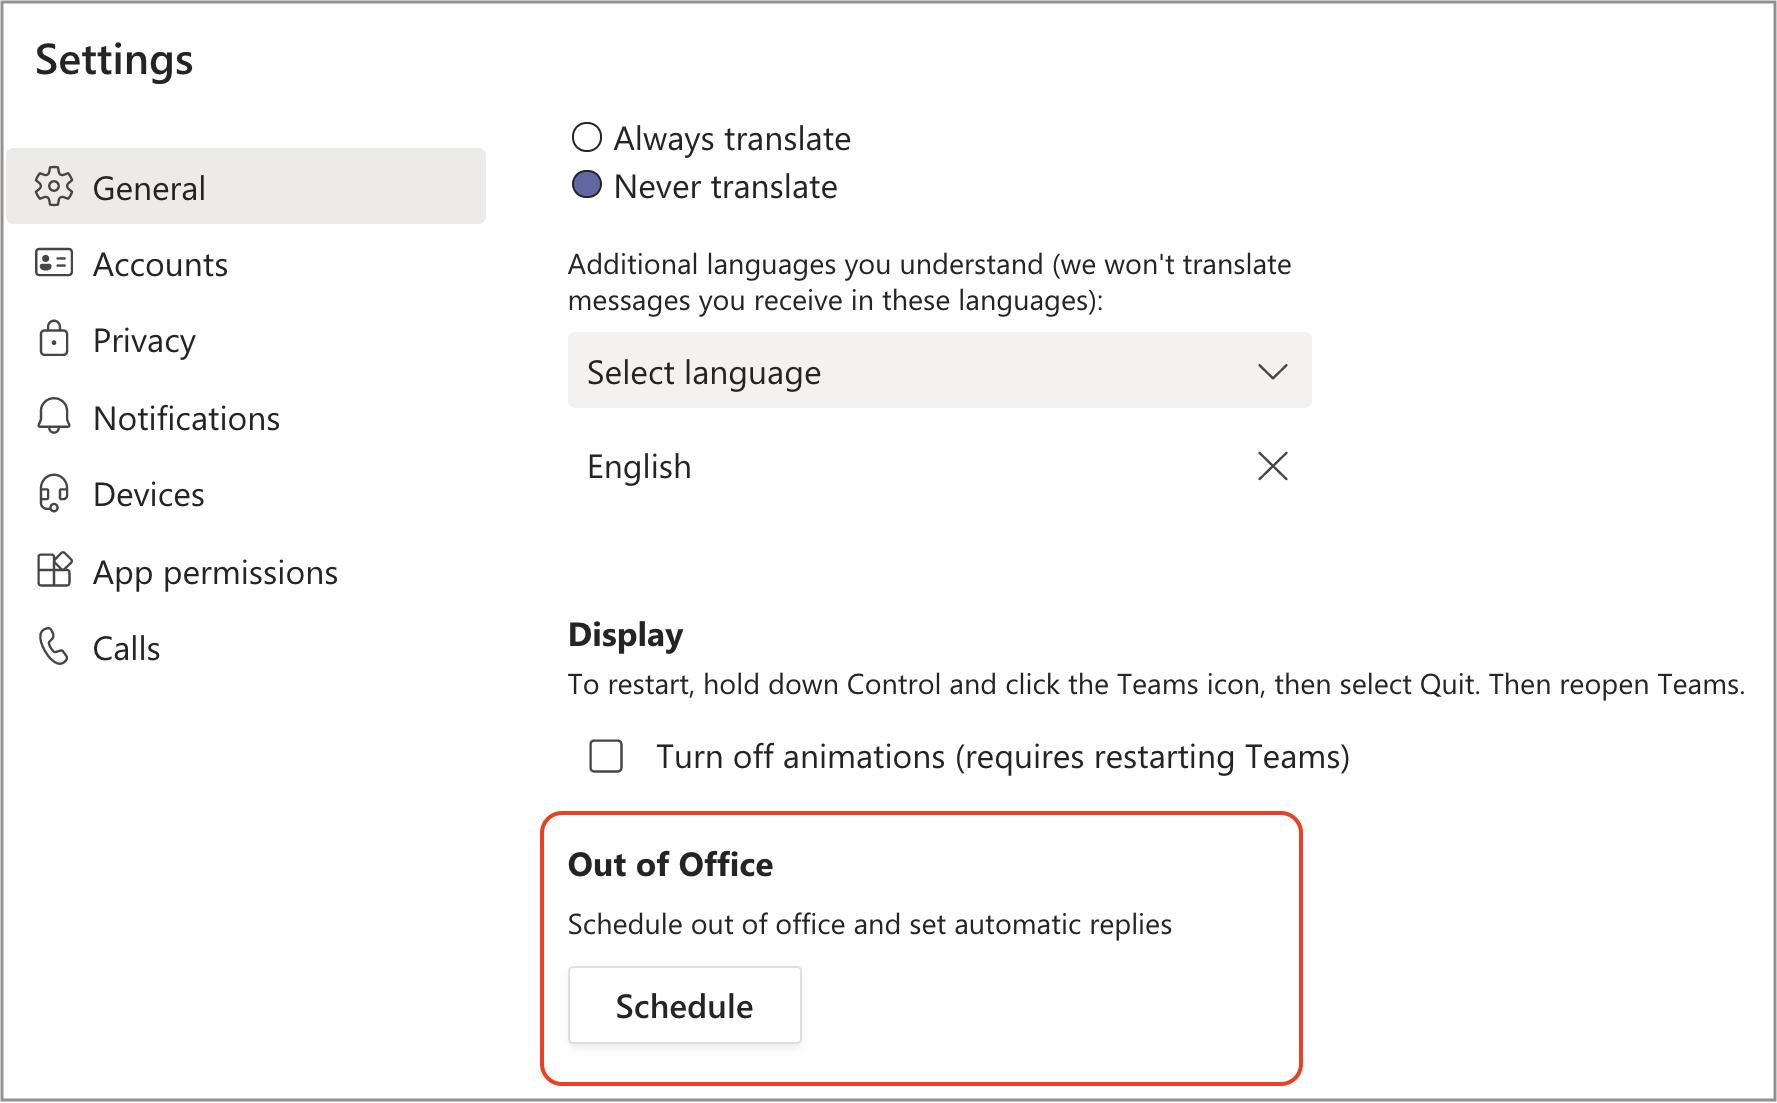 How to set up out of office in microsoft outlook ilovebpo